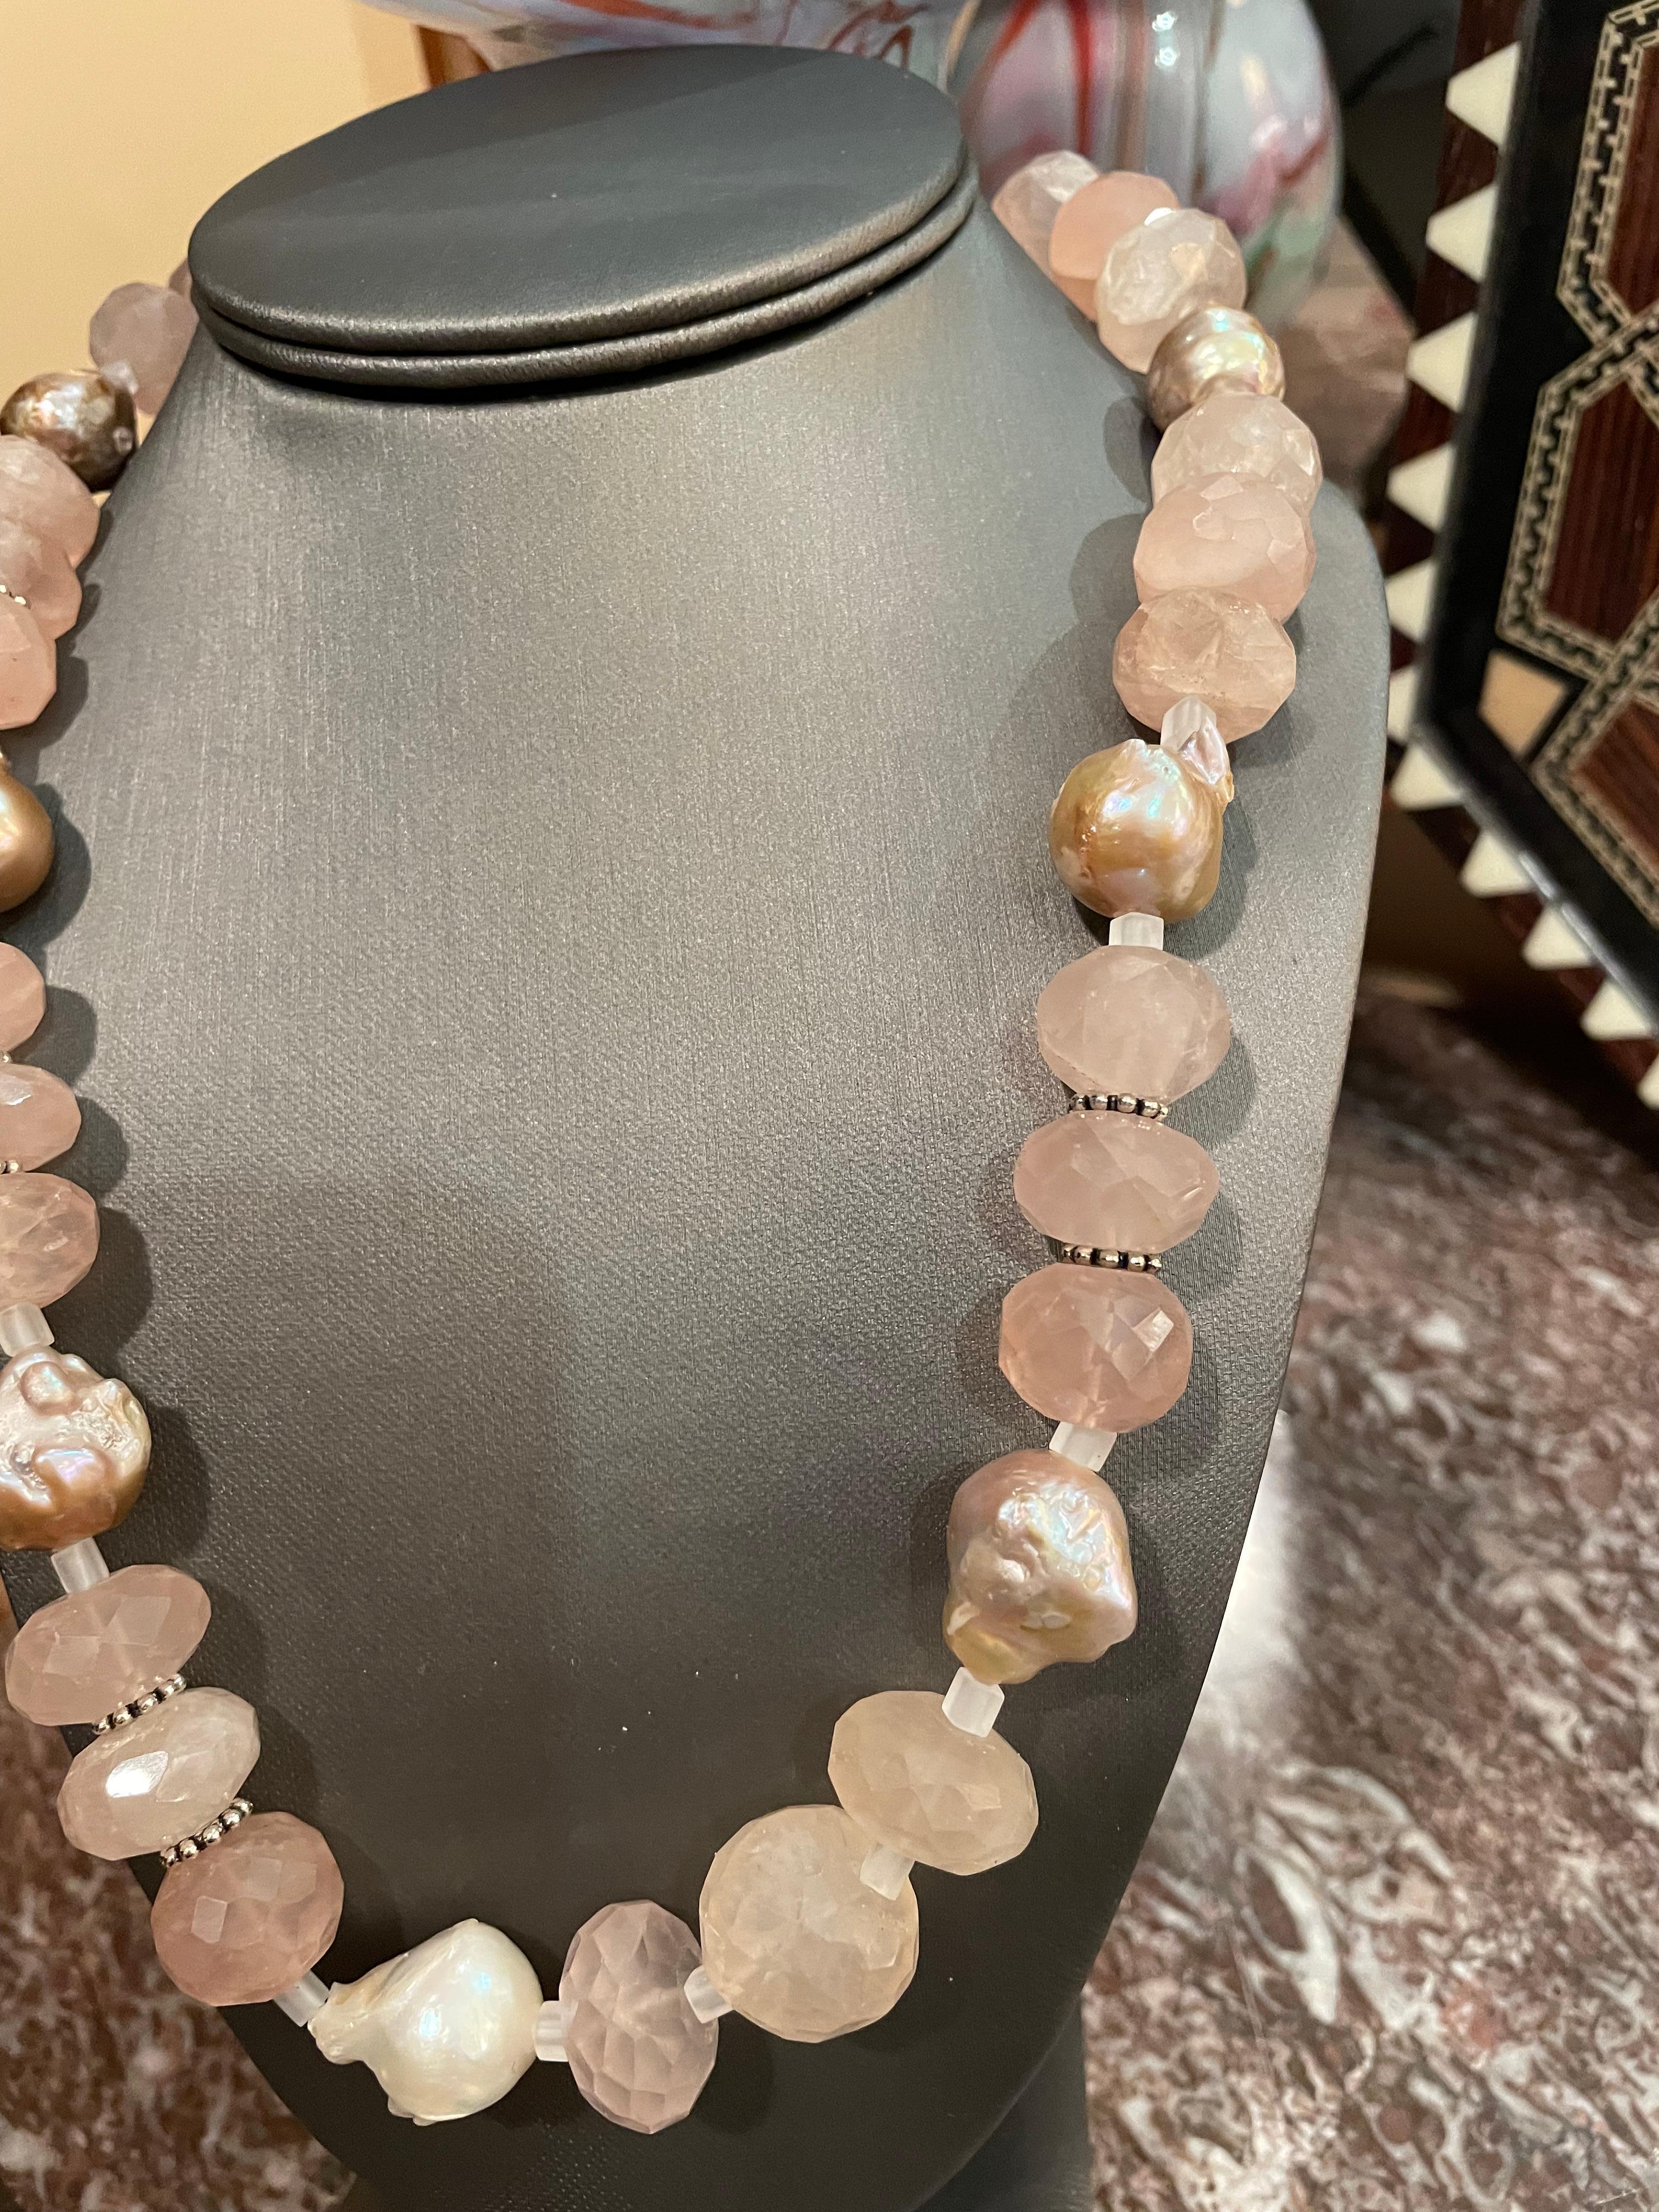 Large faceted rose quartz beads and pink baroque pearls in a gorgeous necklace from Lorraine’s Bijoux is on offer. Sterling silver spacers enhance the fabulous rose quartz beads.A chunky and luxurious piece that would enhance any look.